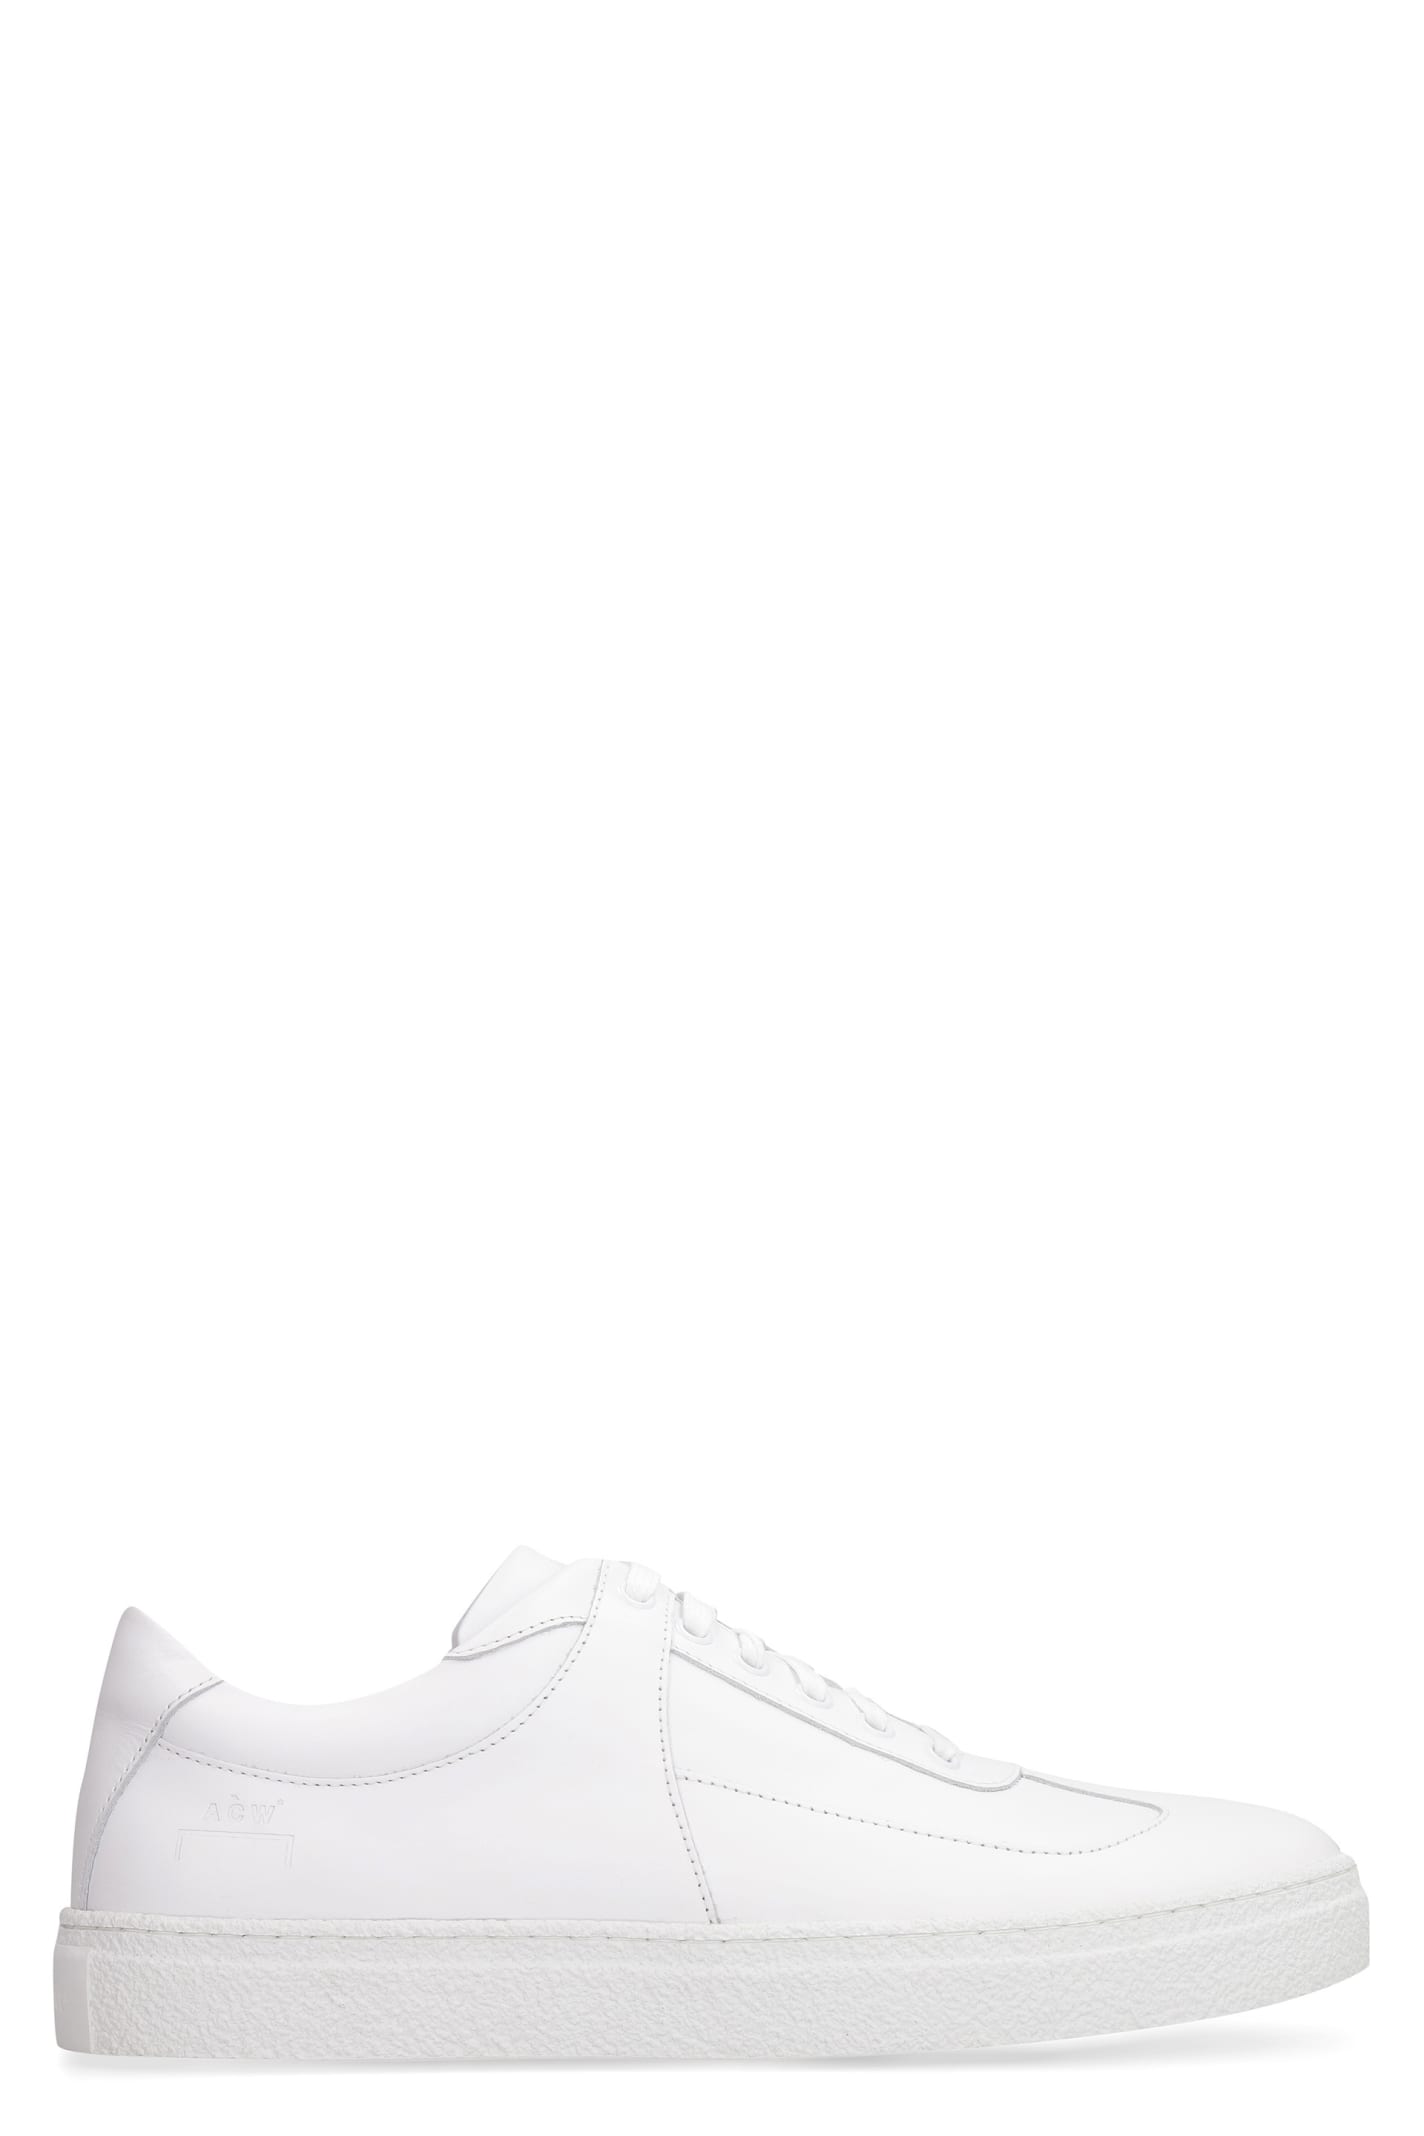 A-COLD-WALL Shard Lo Ii Low-top Sneakers